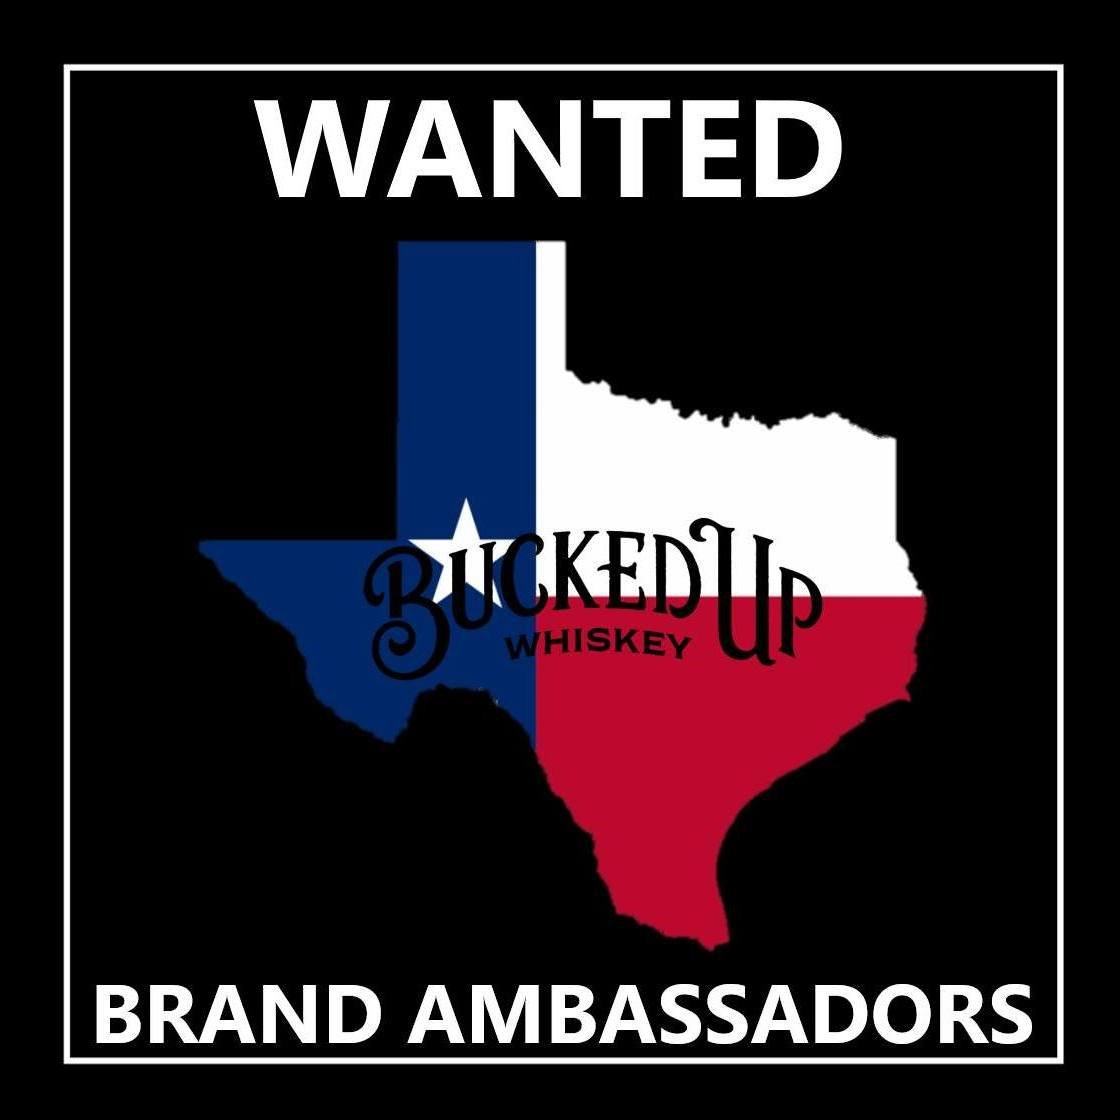 Our placement in Spec's Wines, Spirits &amp; Finer Foods has led to significant growth in Texas, but we have only begun to tap into the full potential of Bucked Up Whiskey in the state. To continue our expansion, we seek passionate Texans to join our